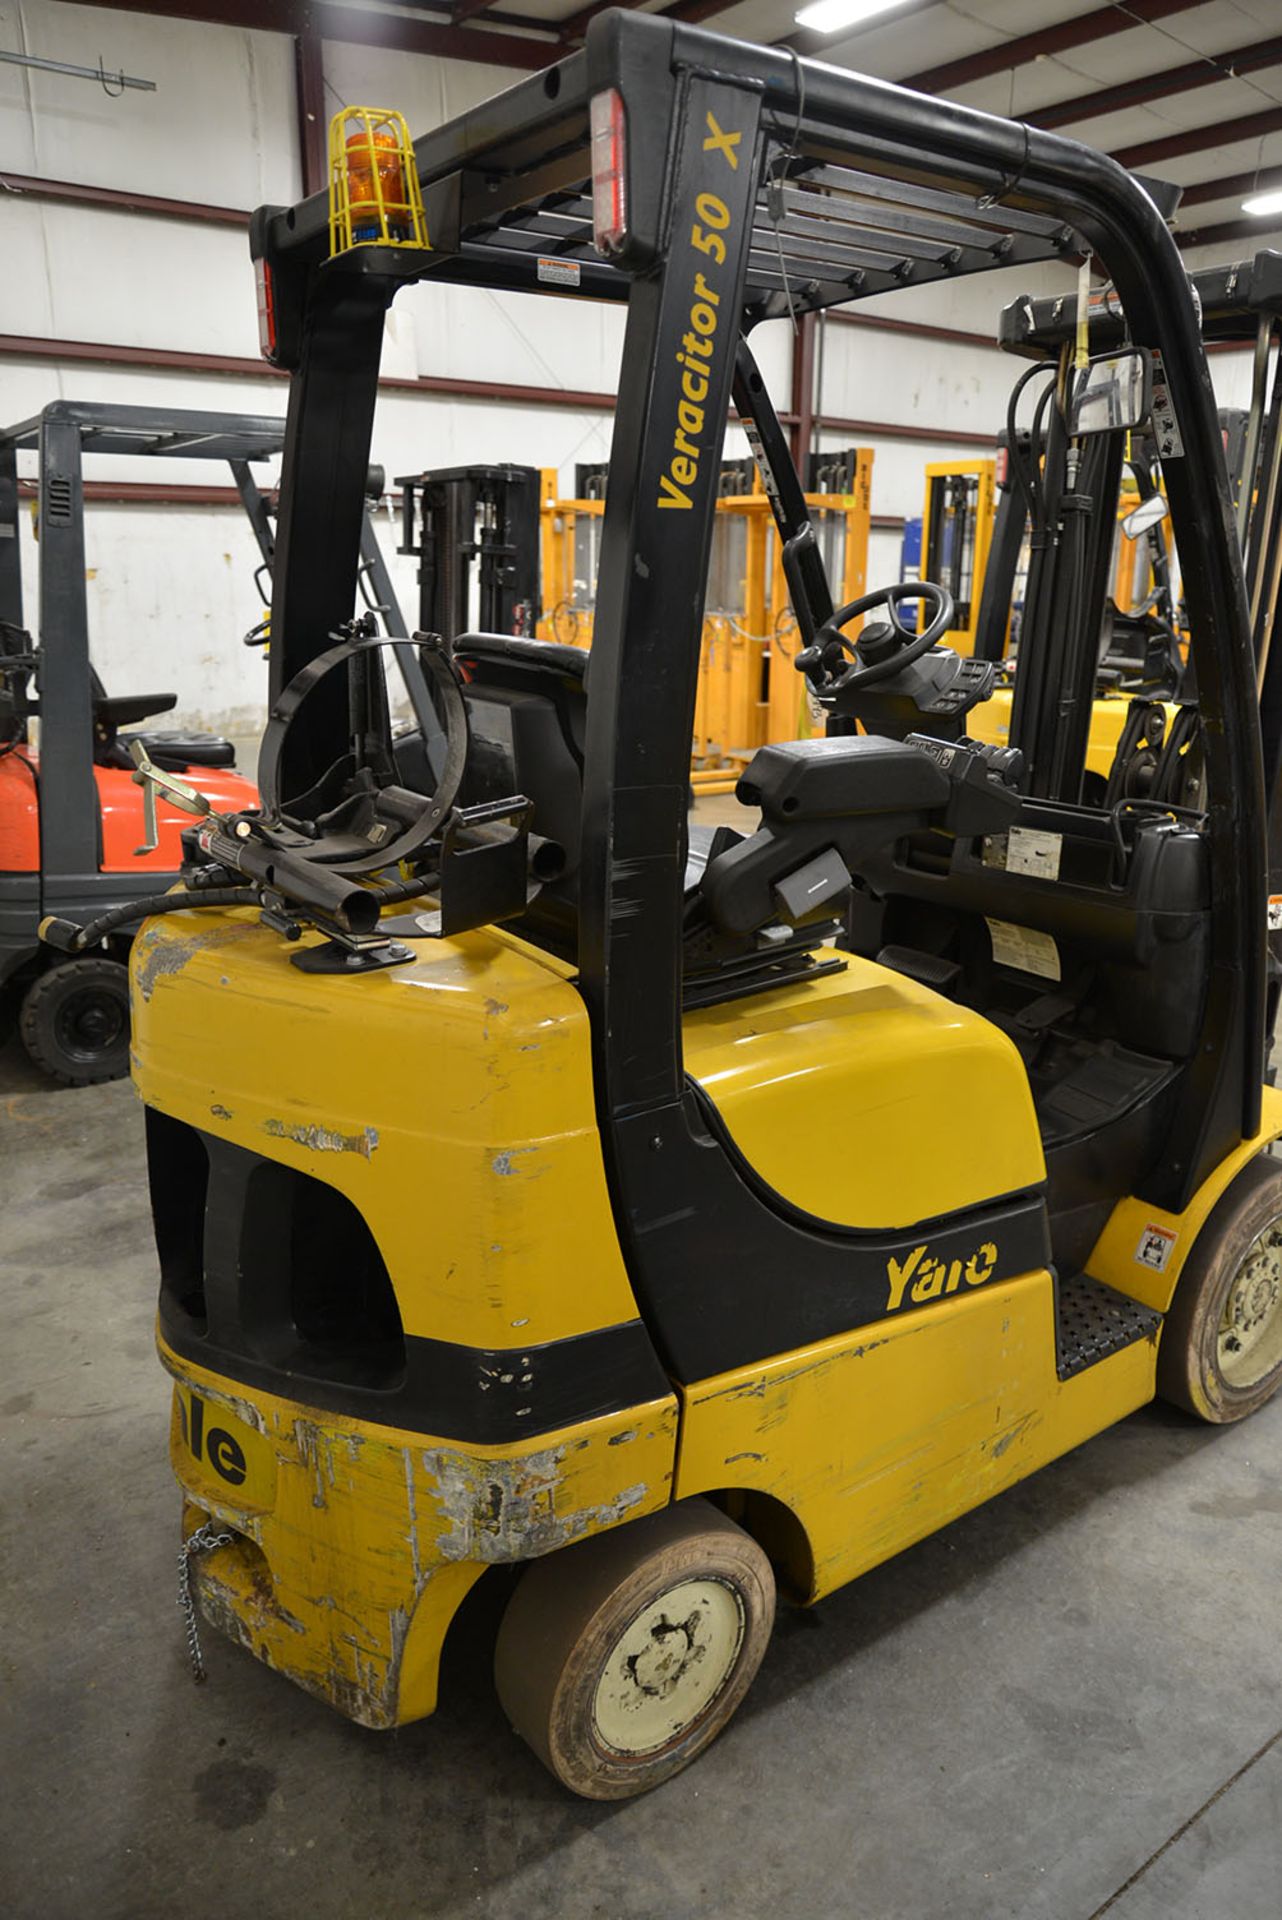 2008 YALE 5,000-lb. Capacity Forklift, Model GLC050VXNV, S/N A910V13929F, LPG, Solid Non-Marking - Image 4 of 6